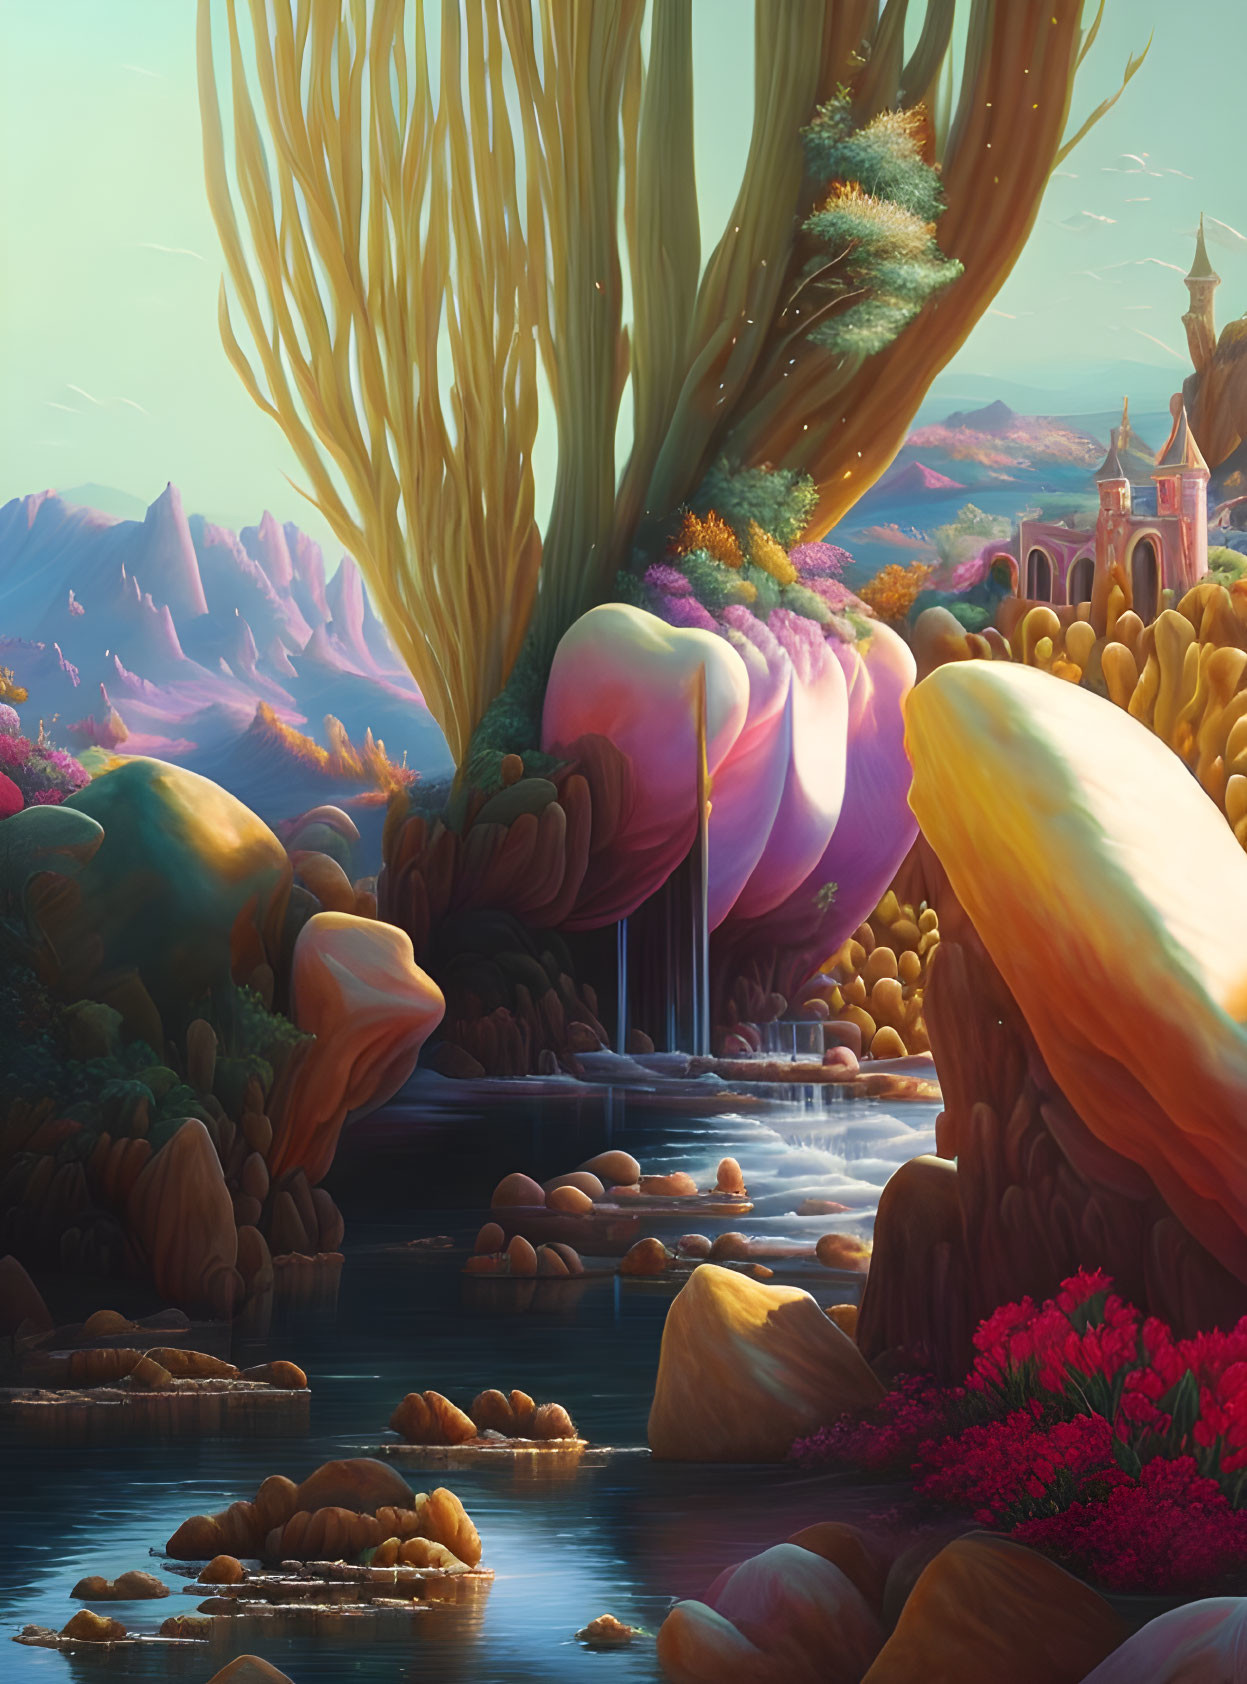 Vibrant fantasy landscape with golden tree, waterfalls, and magical structures